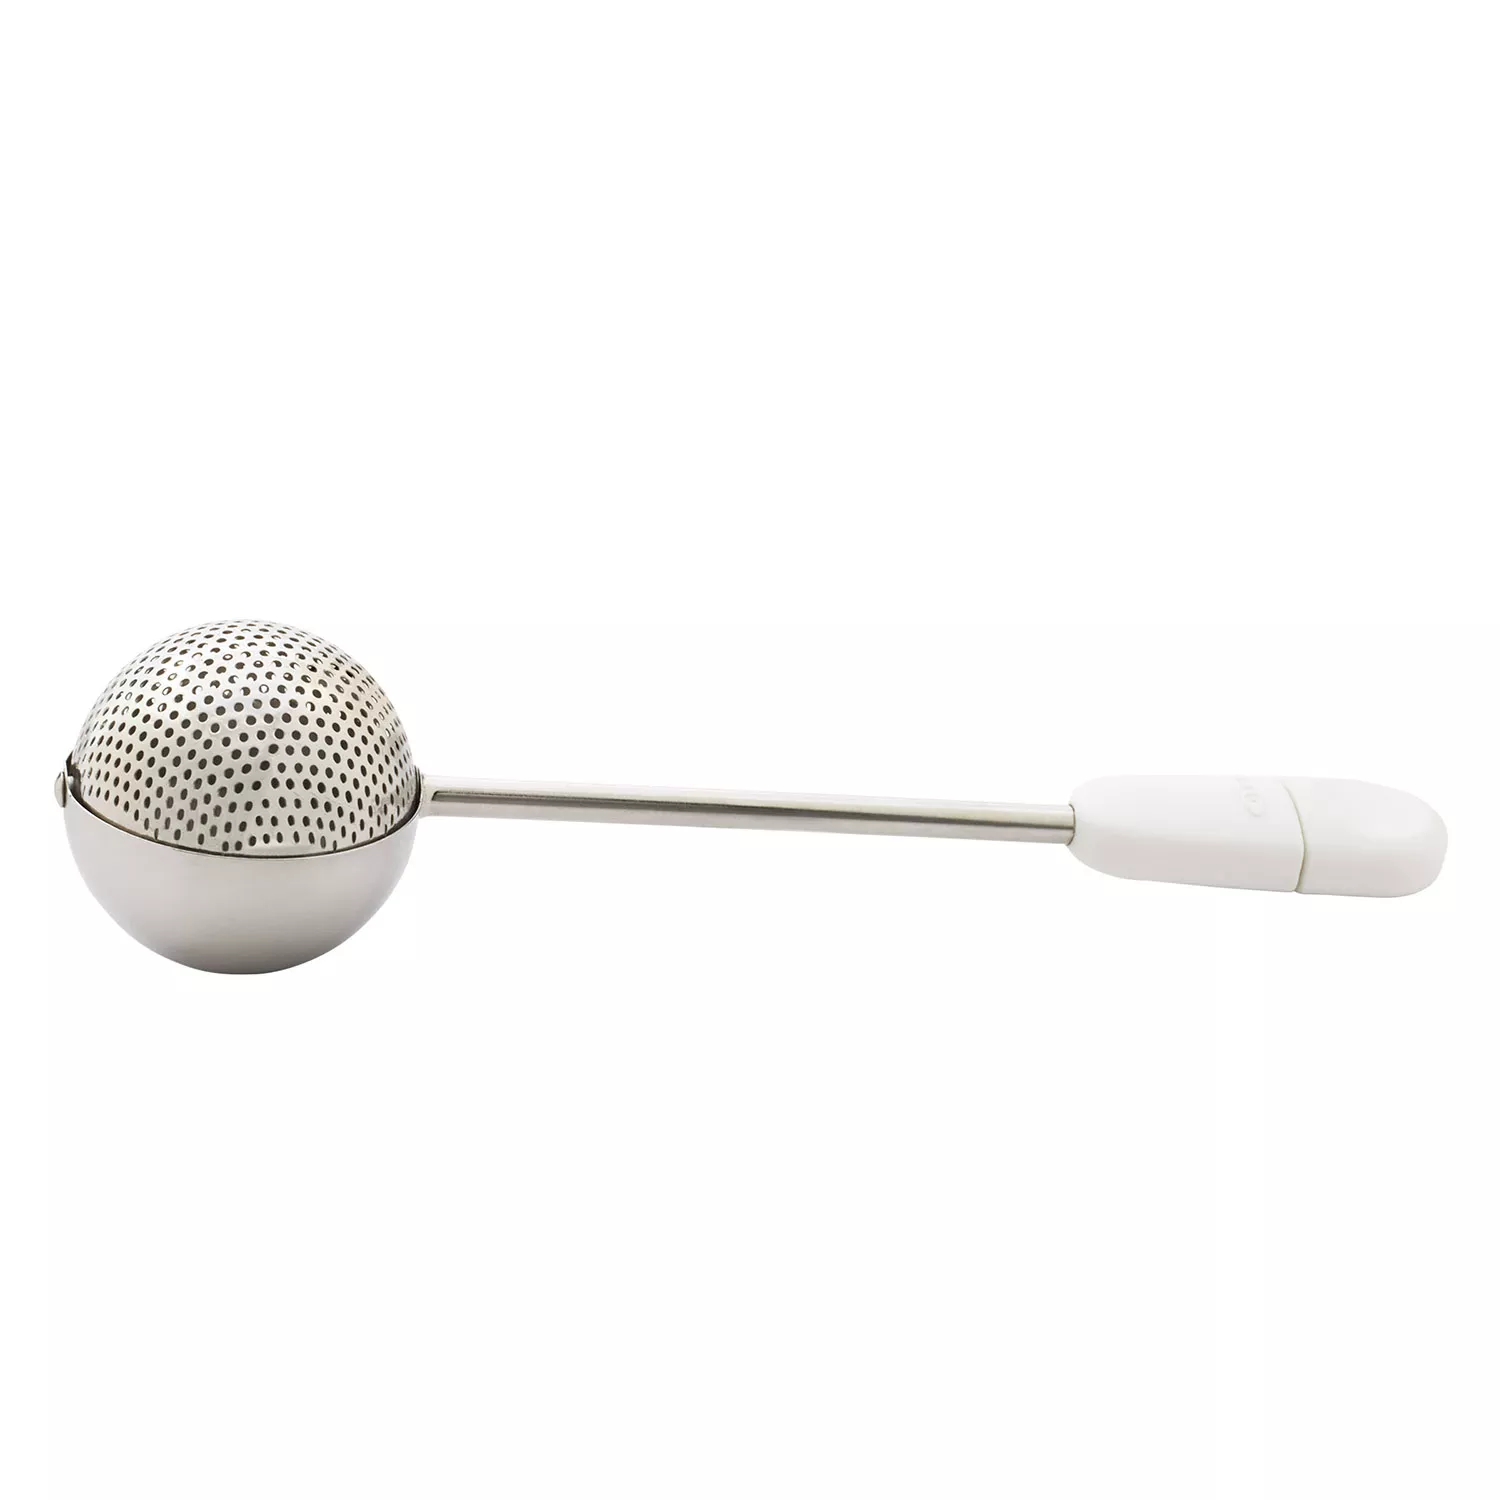 OXO Good Grips Dusting Wand for Powdered Food Products